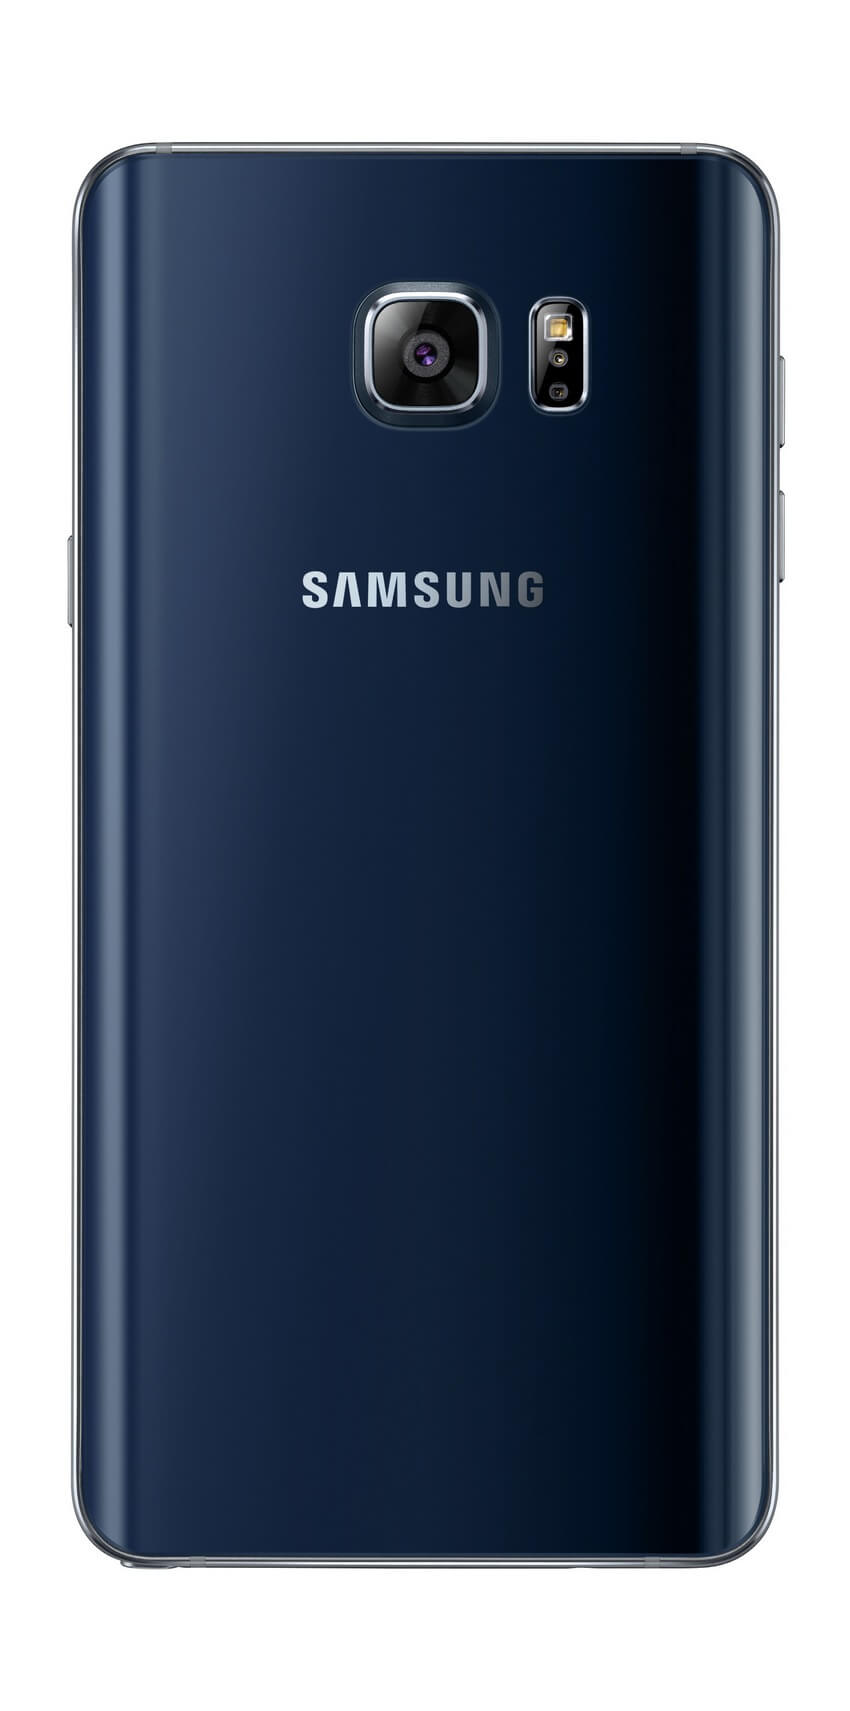 Samsung Galaxy Note 5 Mobile back